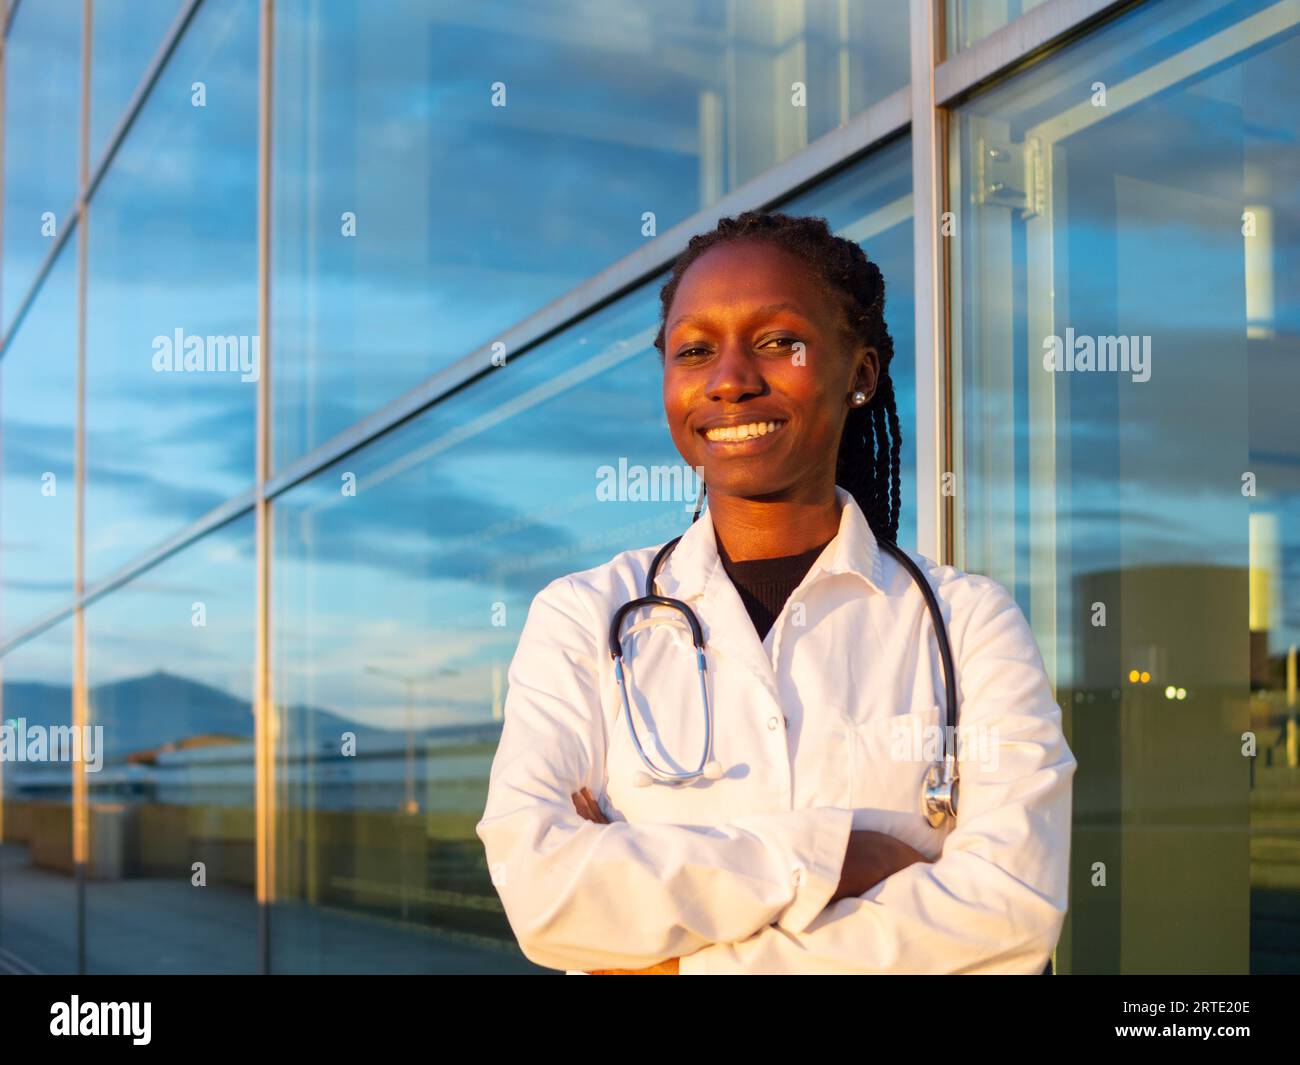 young female doctor crossing her arms in front of a hospital Stock Photo